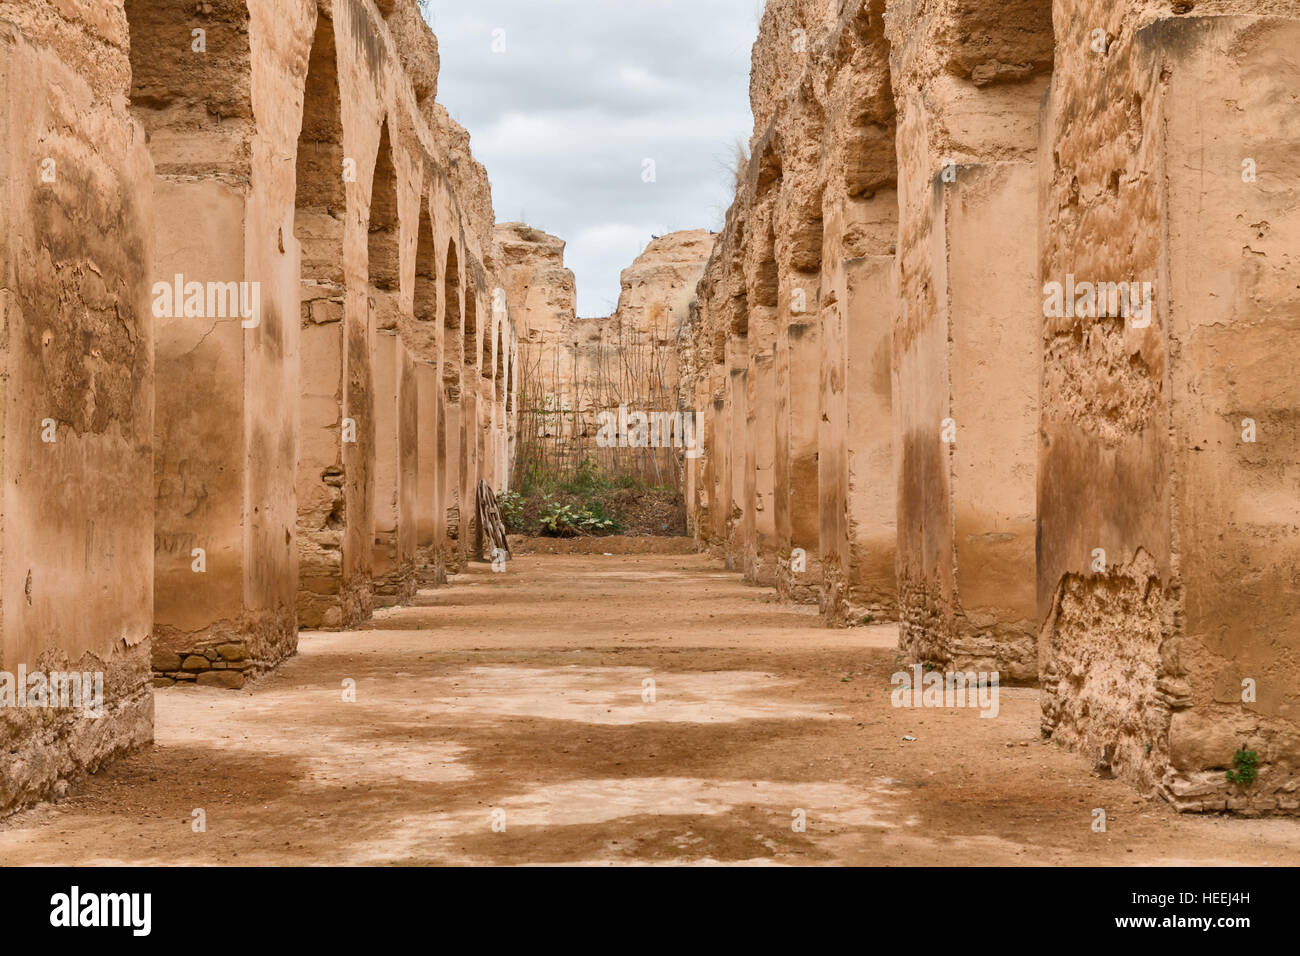 Sultan's stables (18th century), Meknes, Morocco Stock Photo